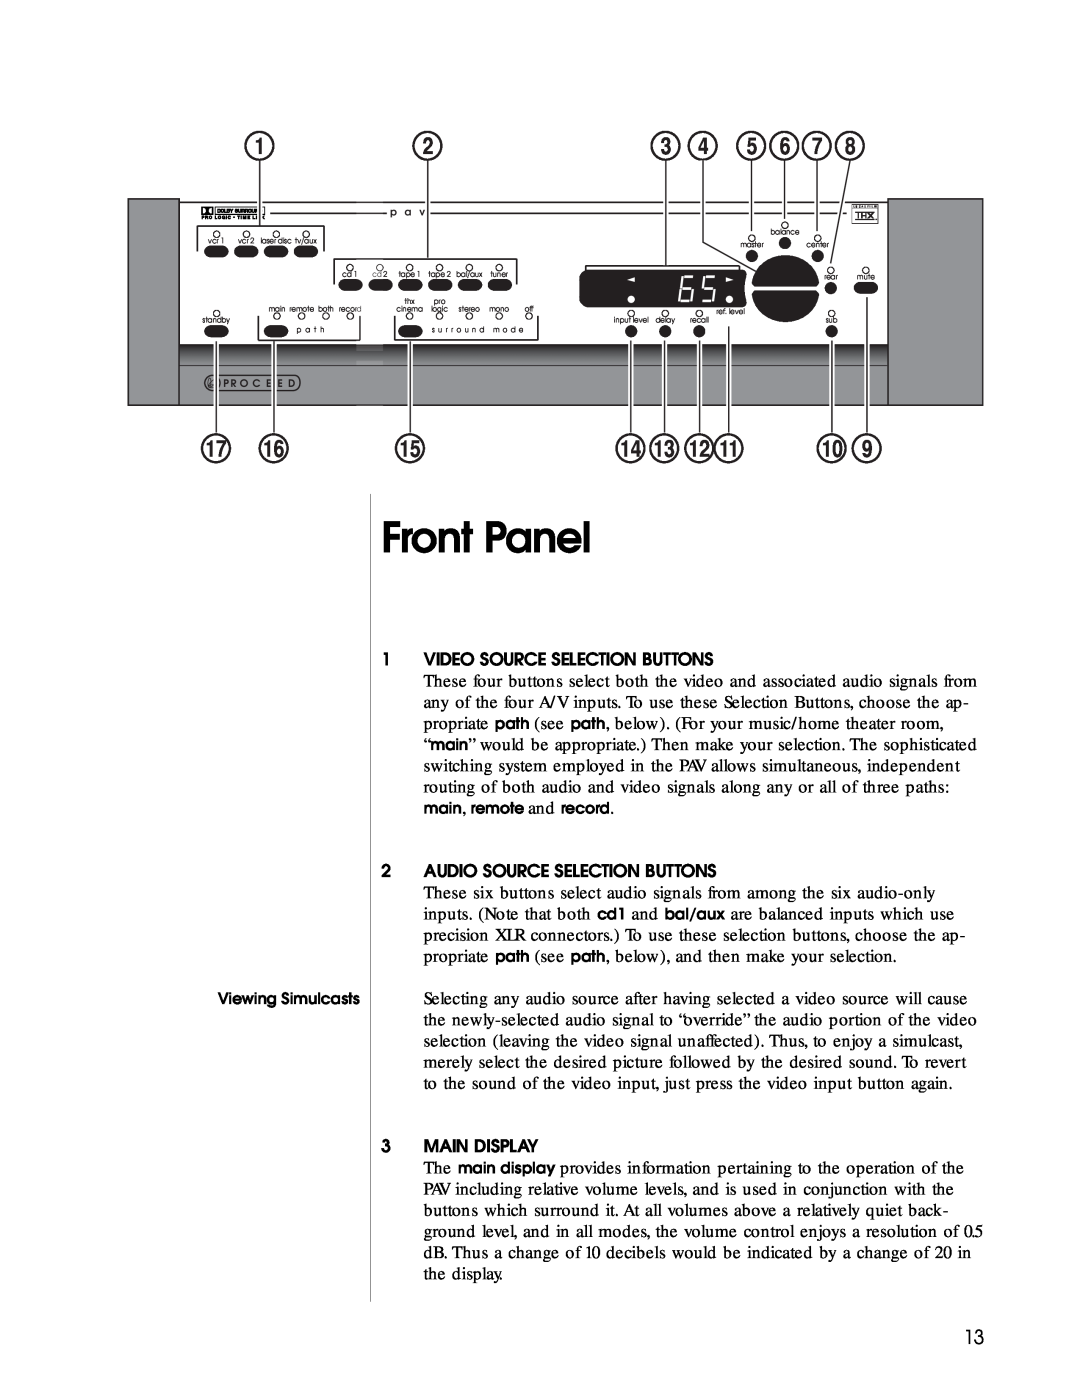 Madrigal Imaging Audio/Video Preamplifier Front Panel, 1VIDEO SOURCE SELECTION BUTTONS, 2AUDIO SOURCE SELECTION BUTTONS 